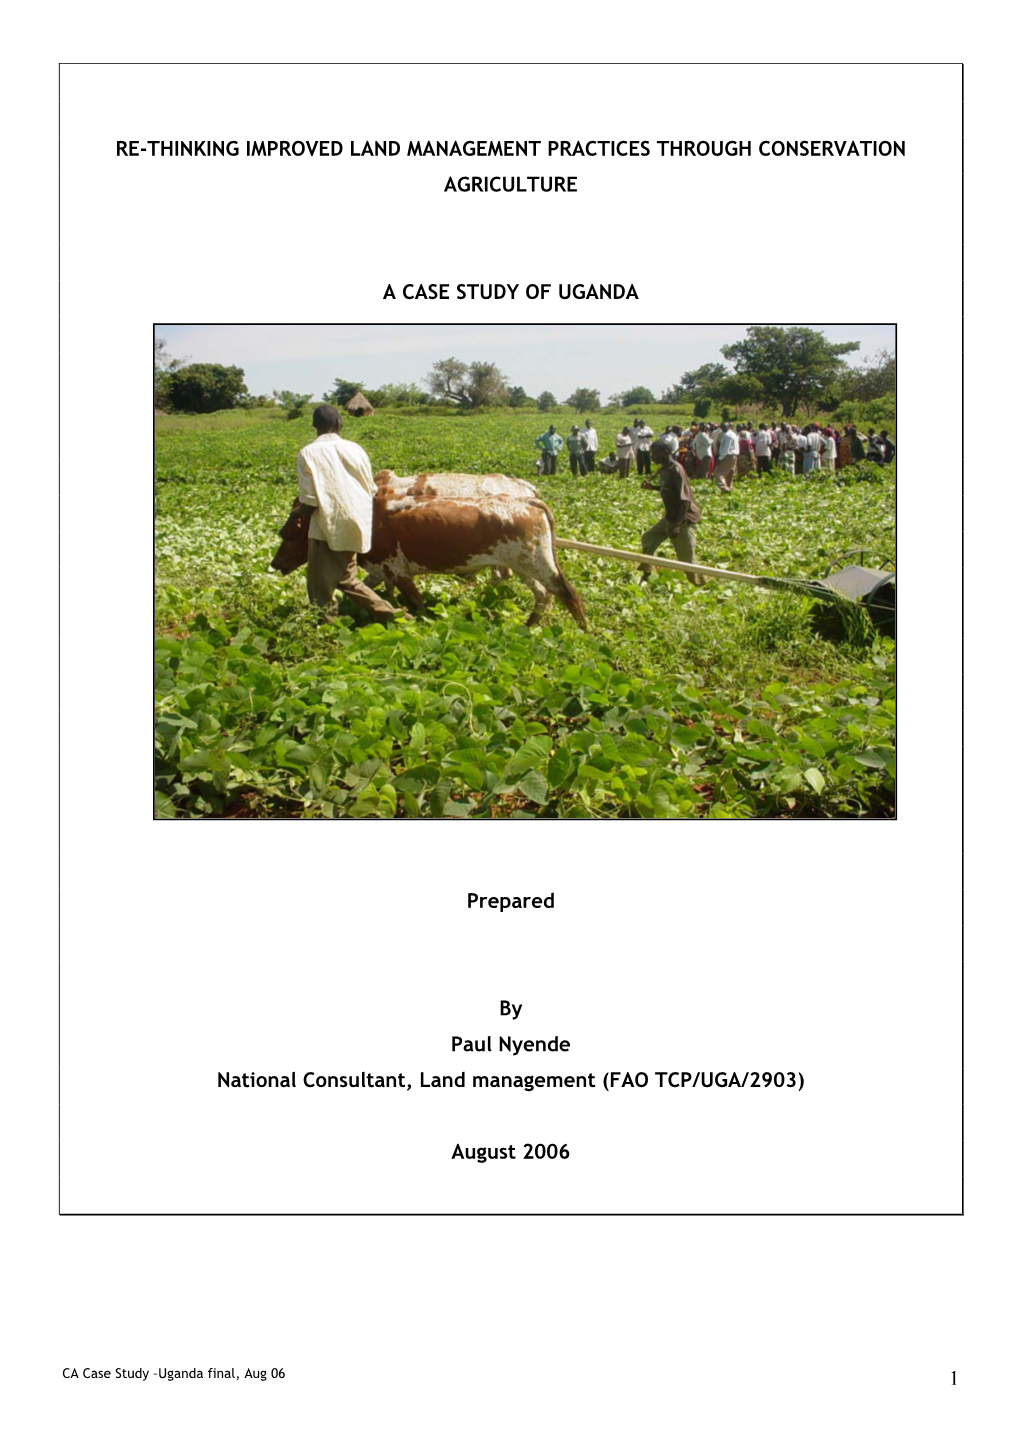 Re-Thinking Improved Land Management Practices Through Conservation Agriculture